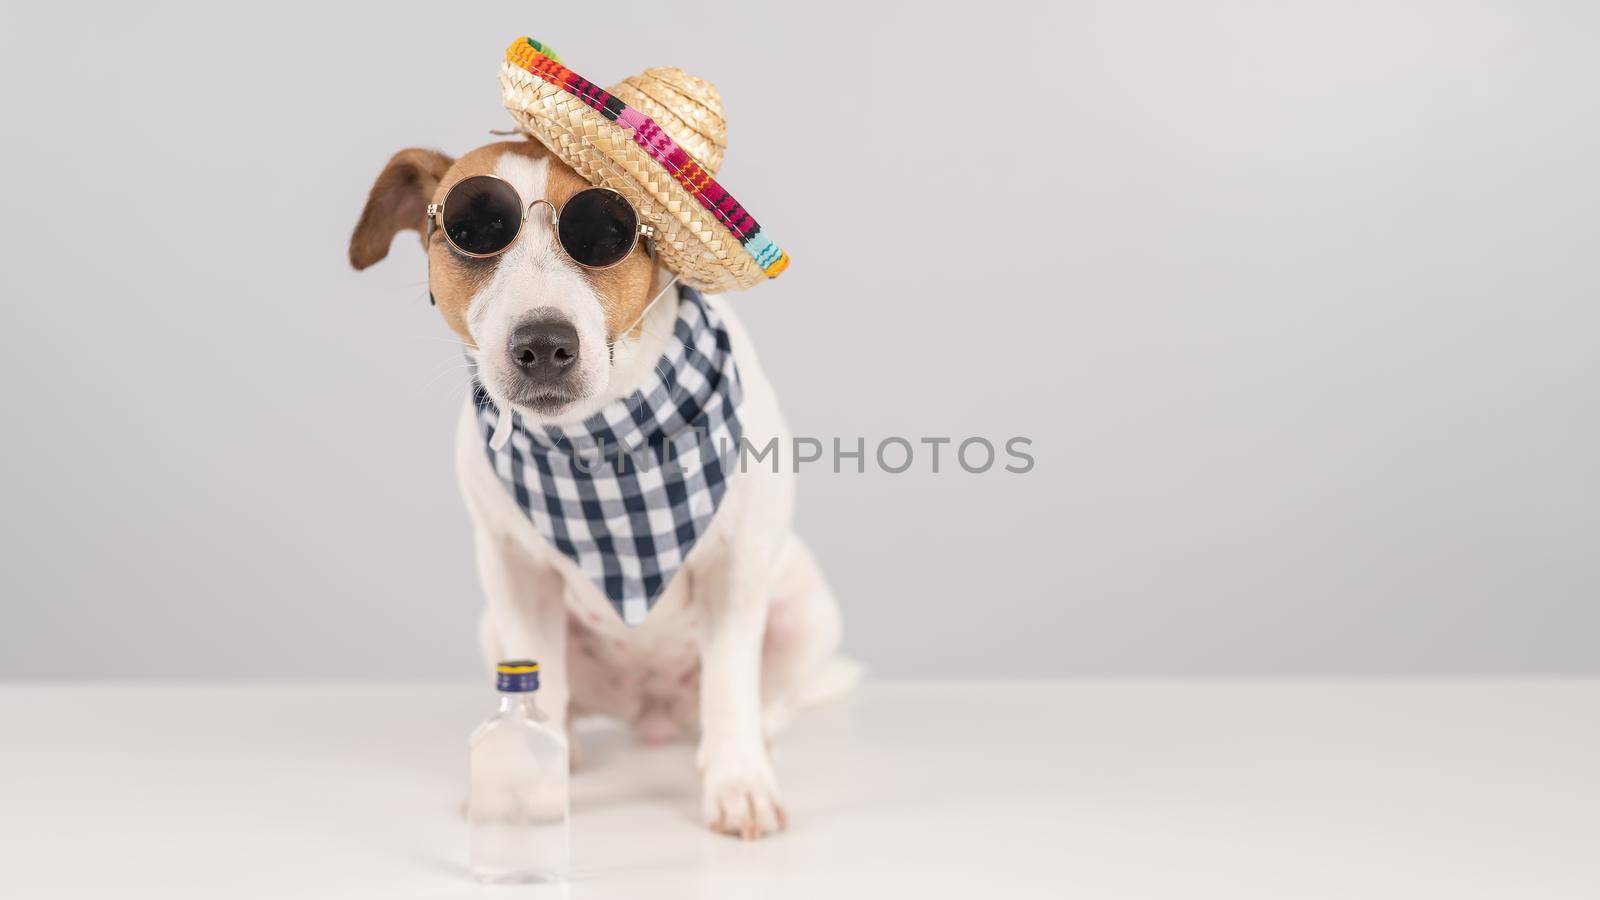 Jack Russell Terrier dog dressed as a Mexican. by mrwed54